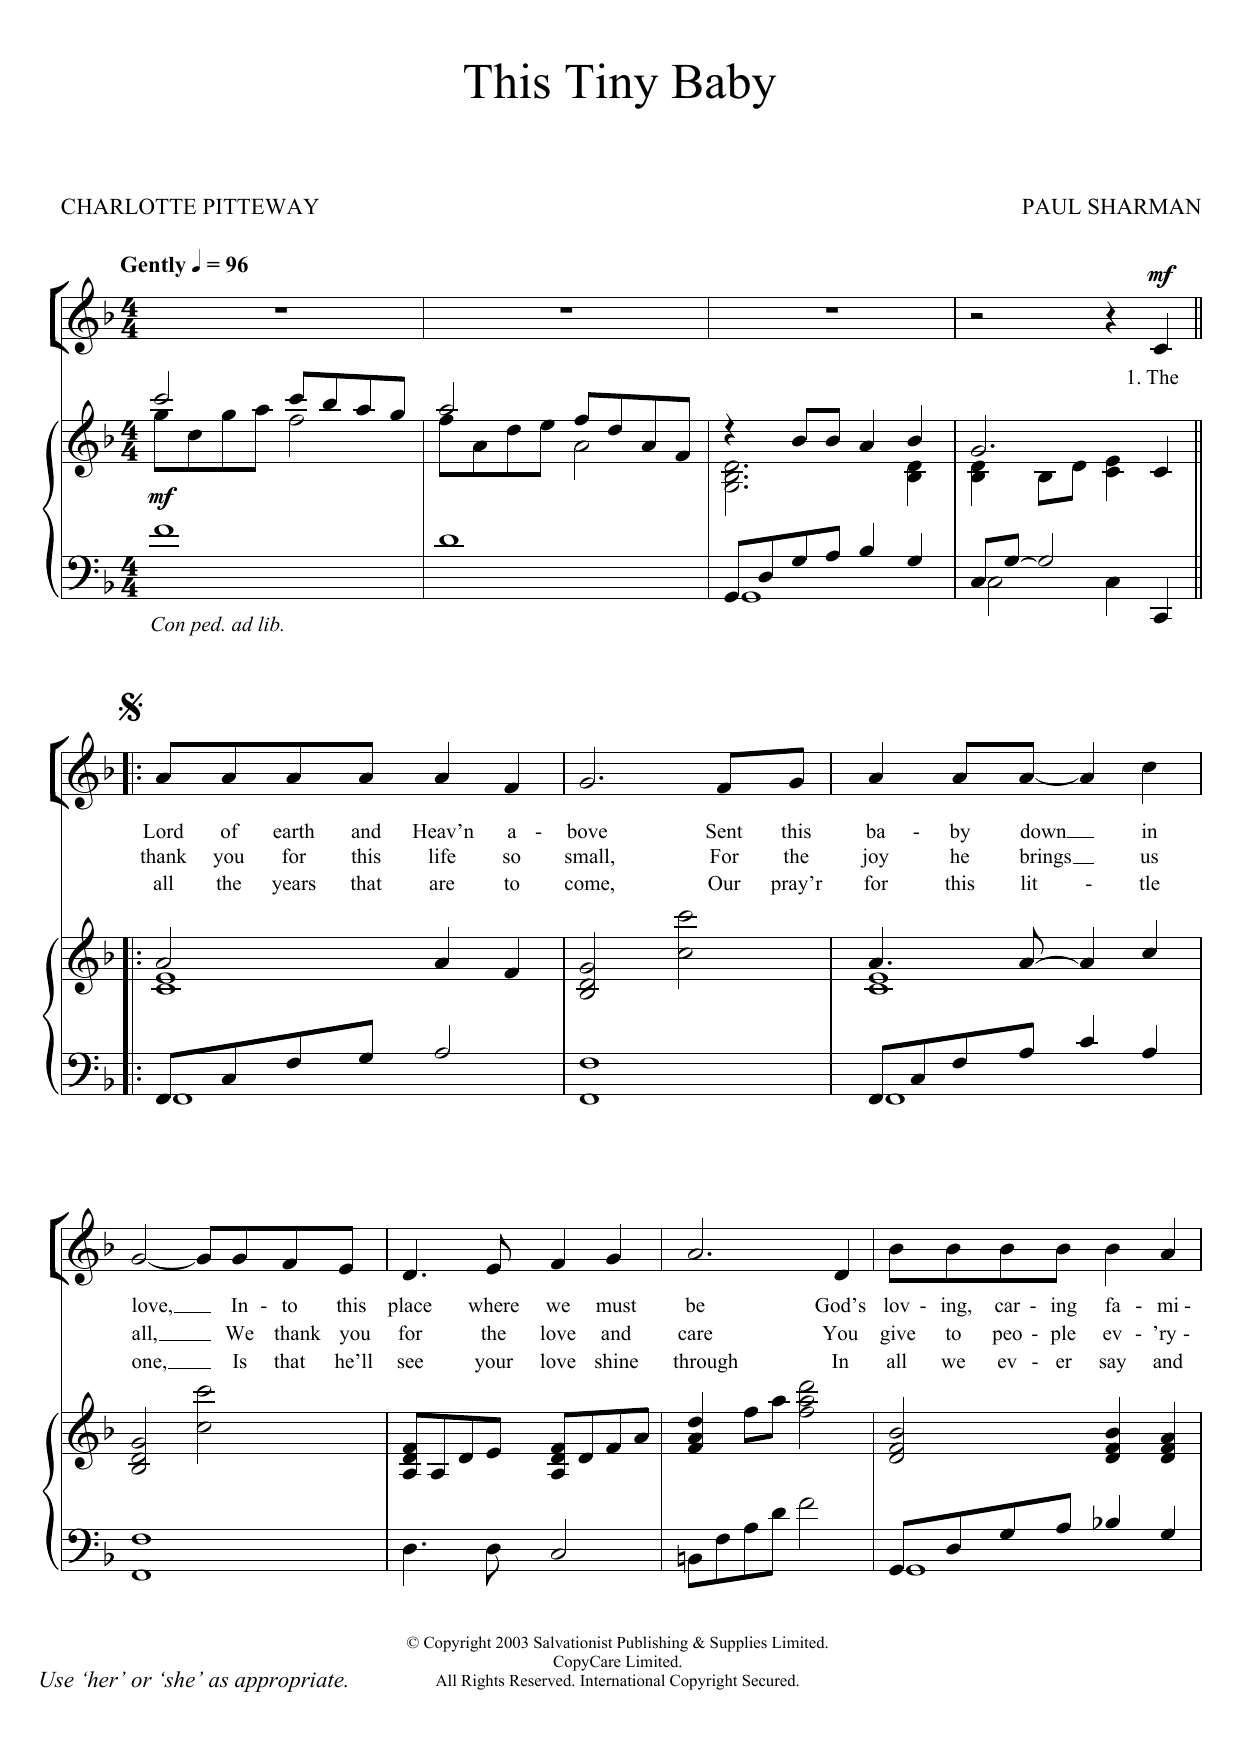 Download The Salvation Army This Tiny Baby Sheet Music